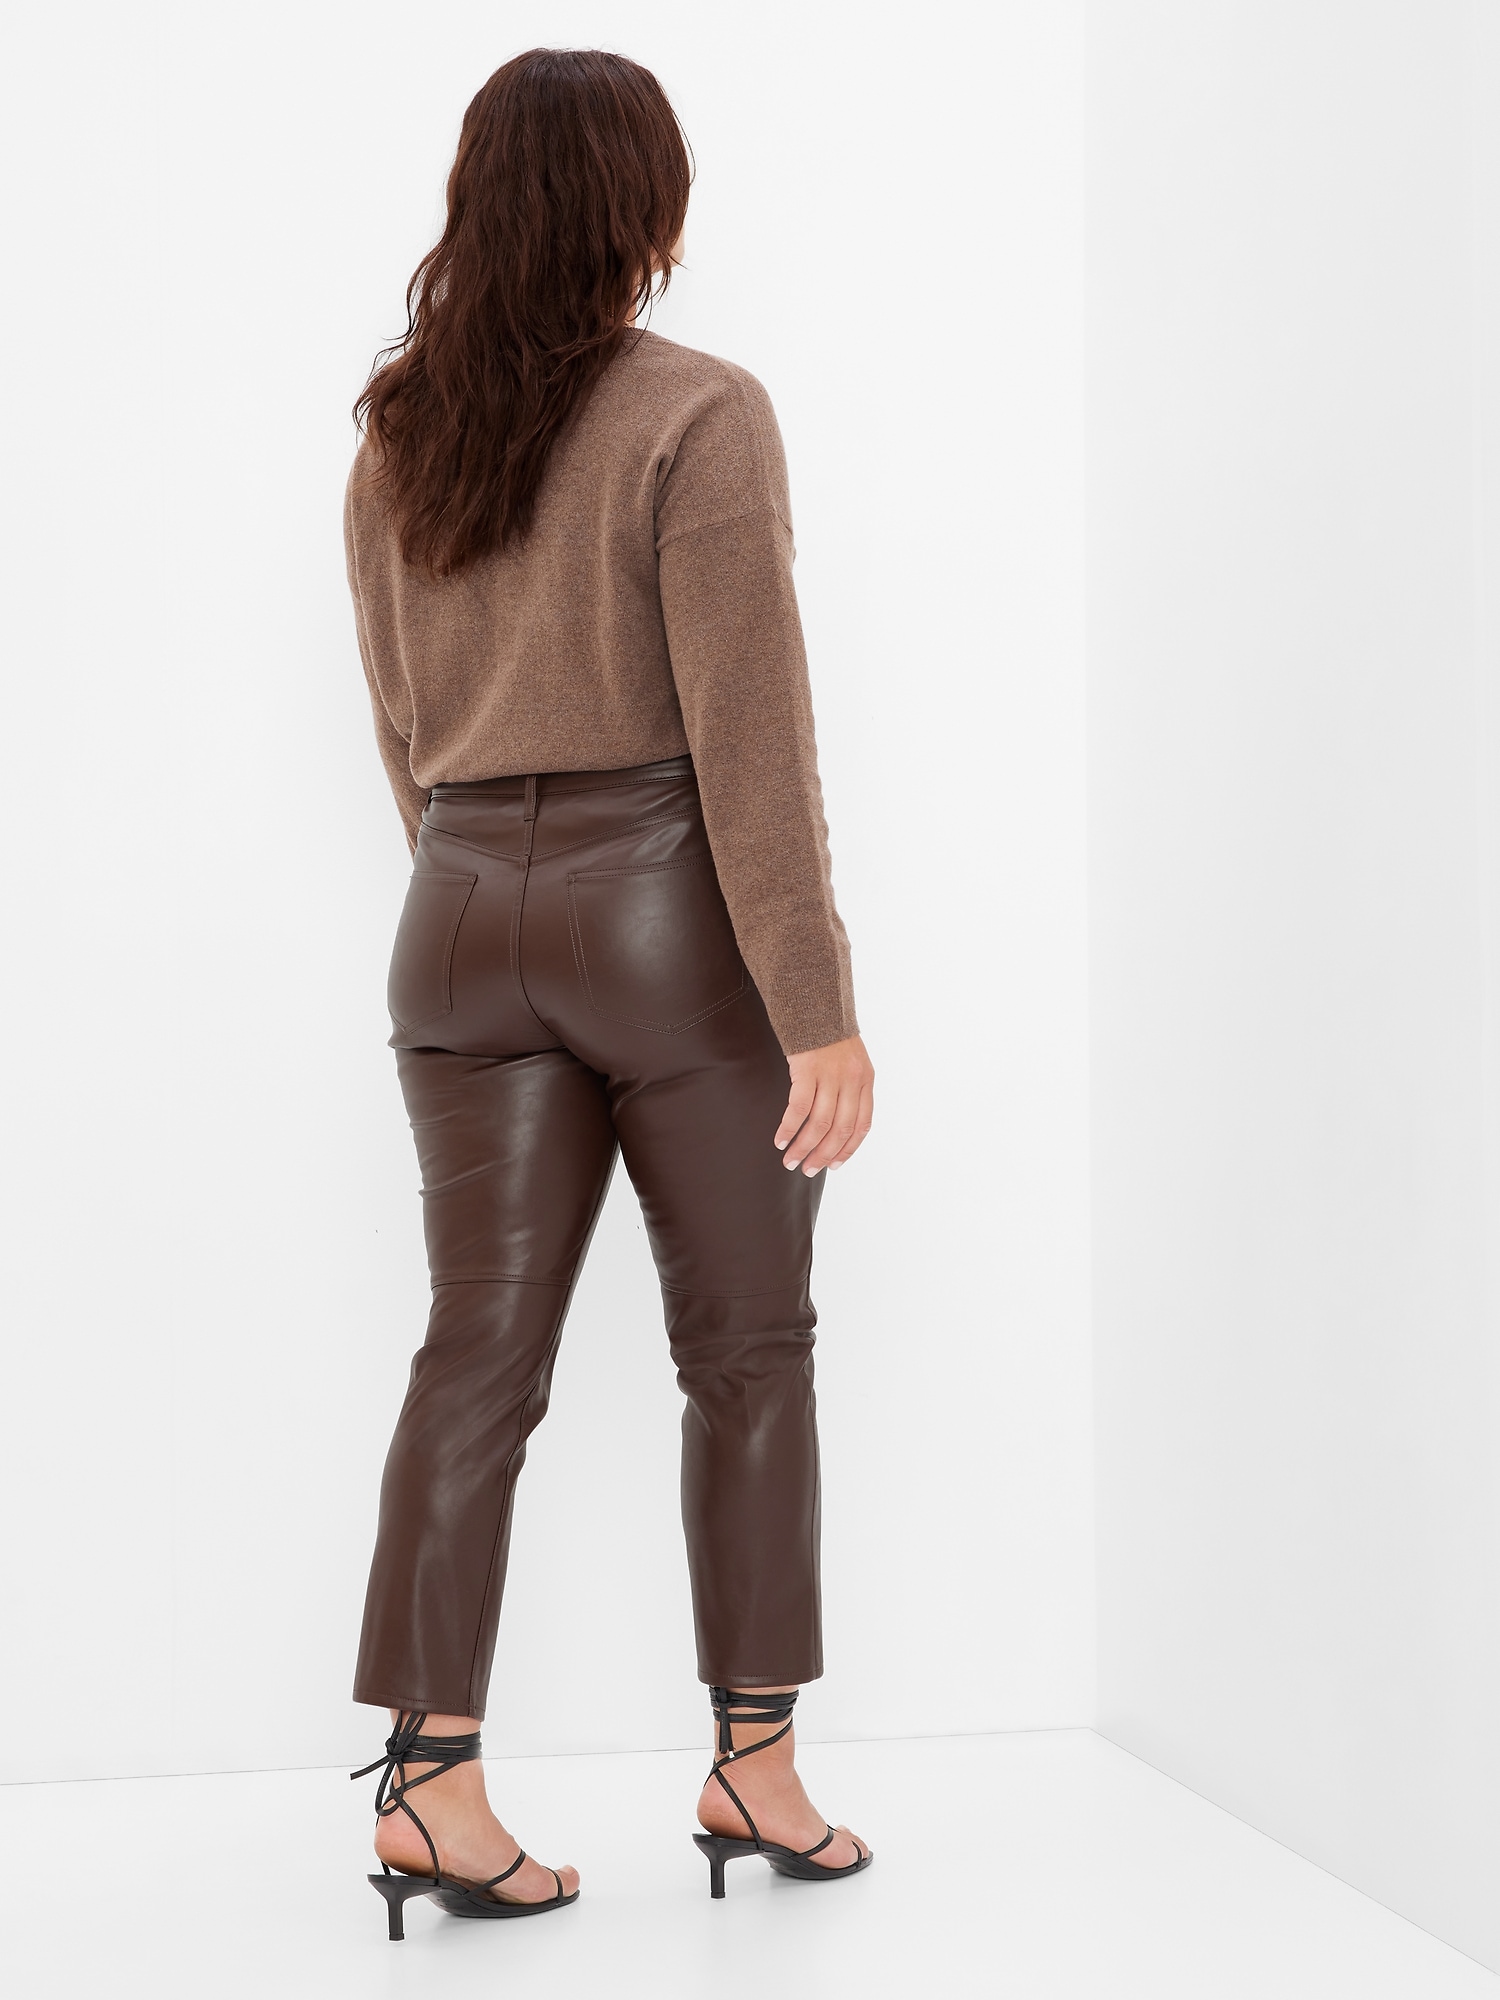 Gap 100% Leather Solid Brown Leather Pants Size 0 - 71% off